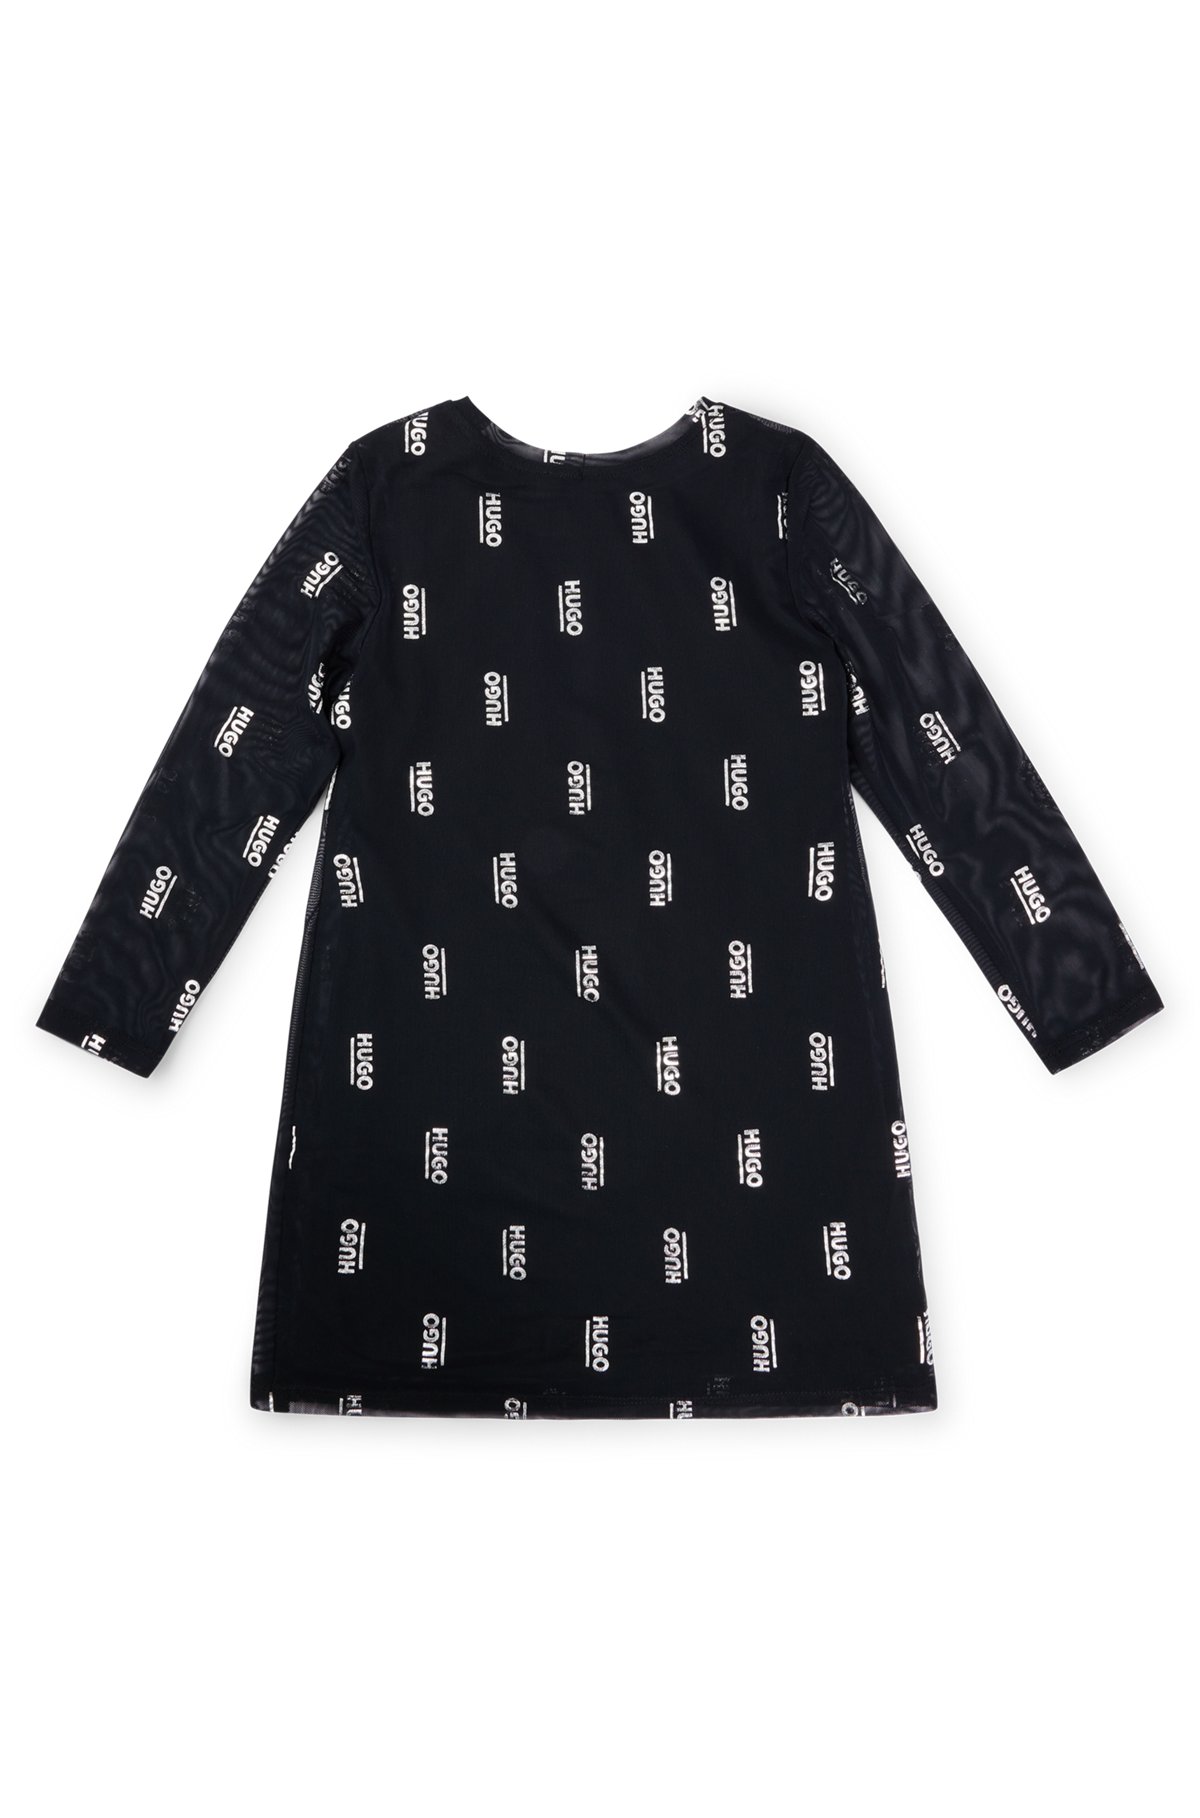 Kids' two-in-one dress with foil-printed logos, Black